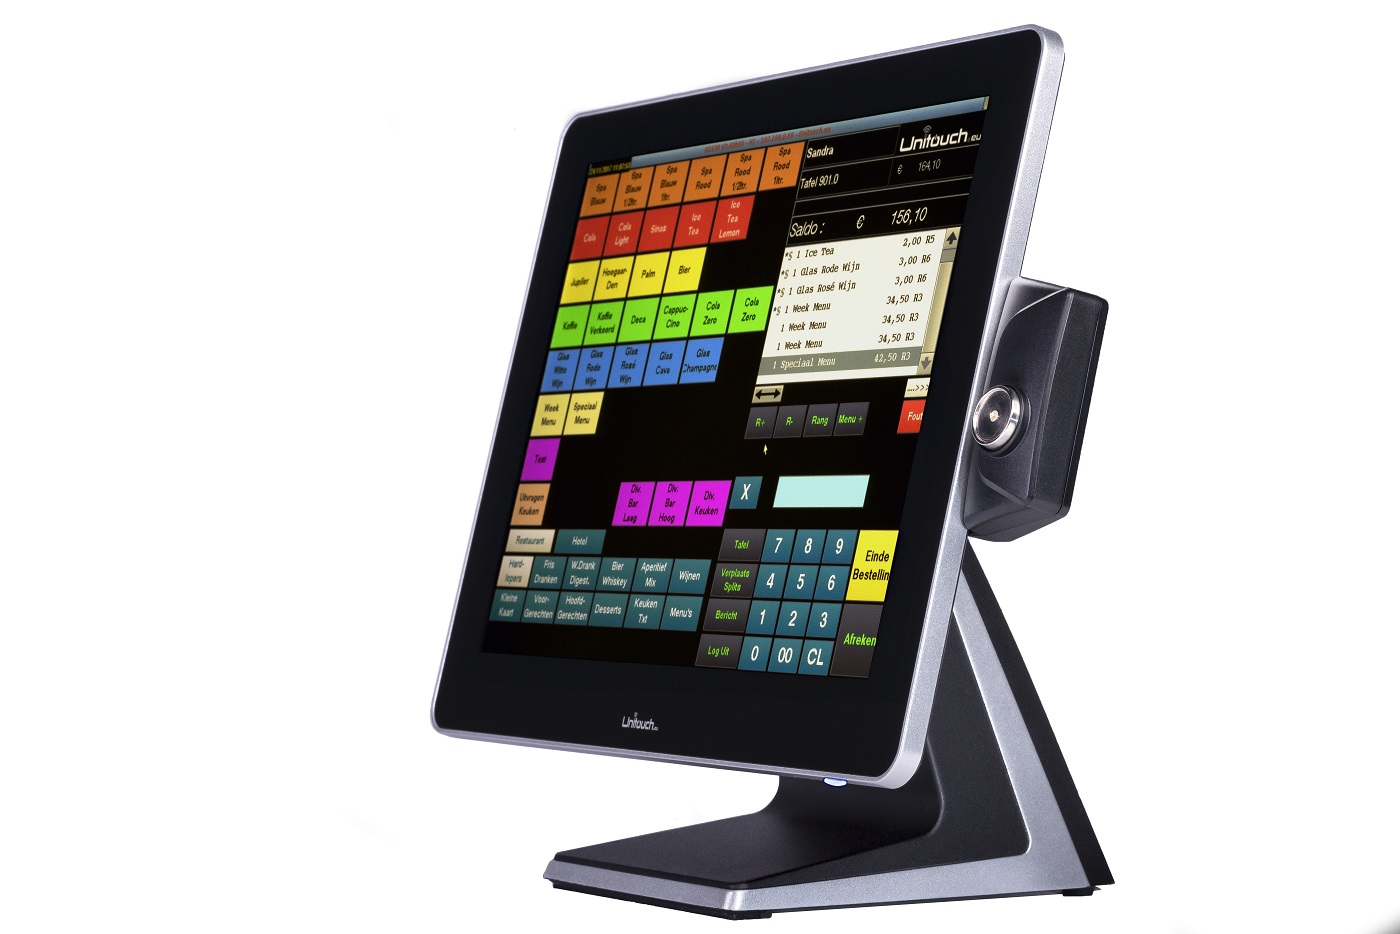 Unitouch product image 1